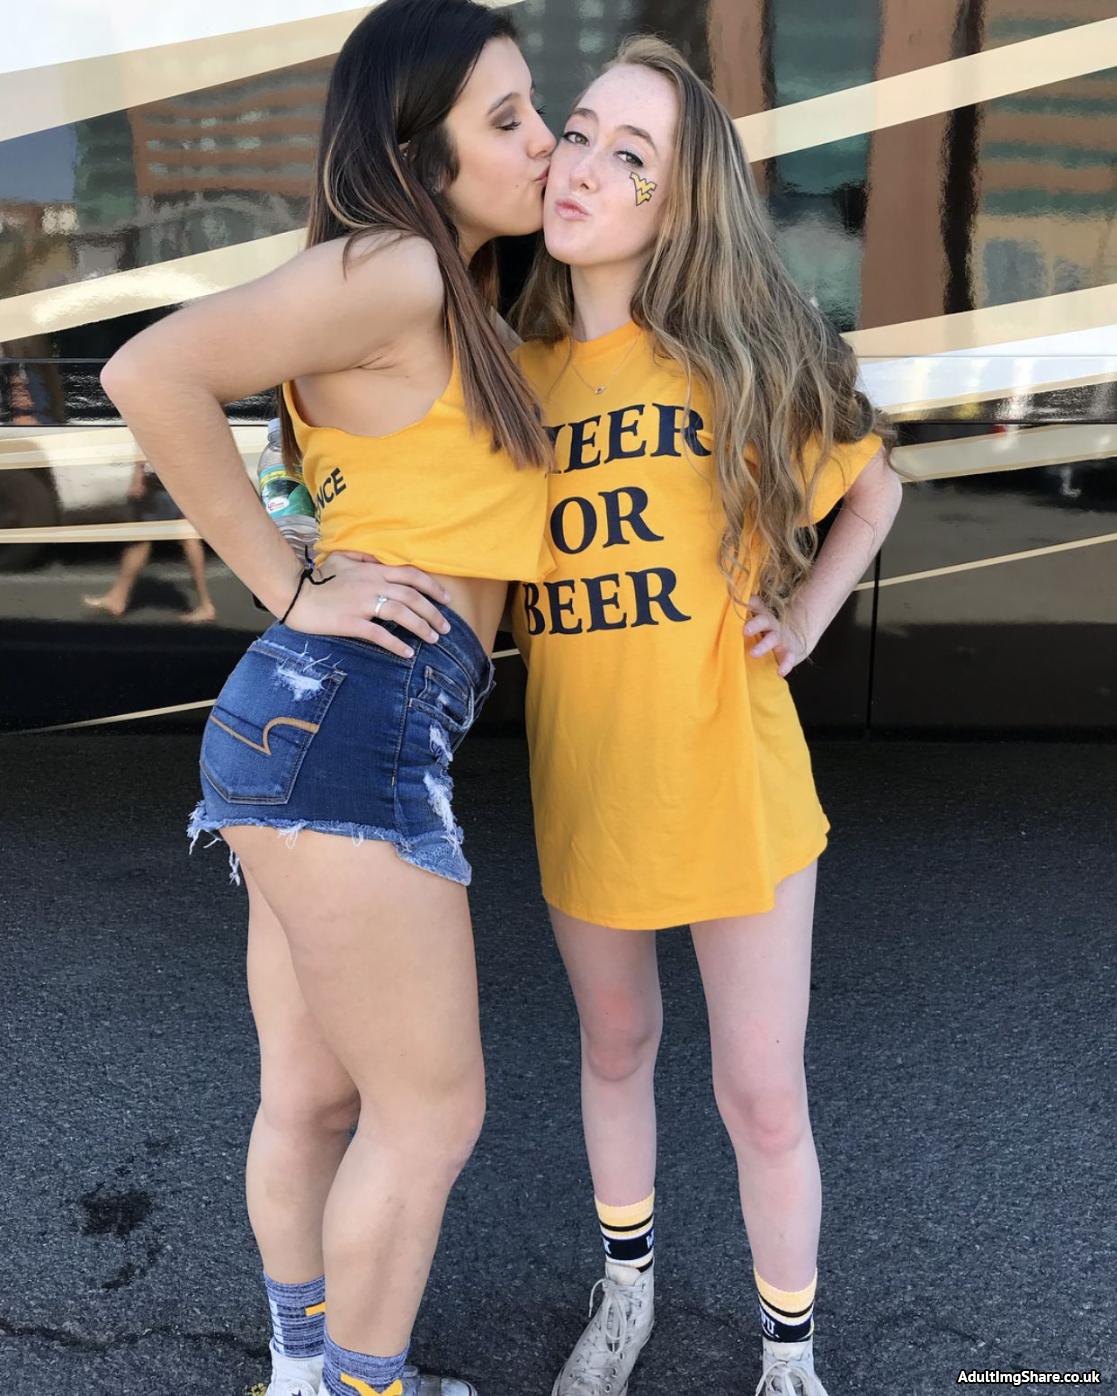 Two Cute College Girls Photo Together